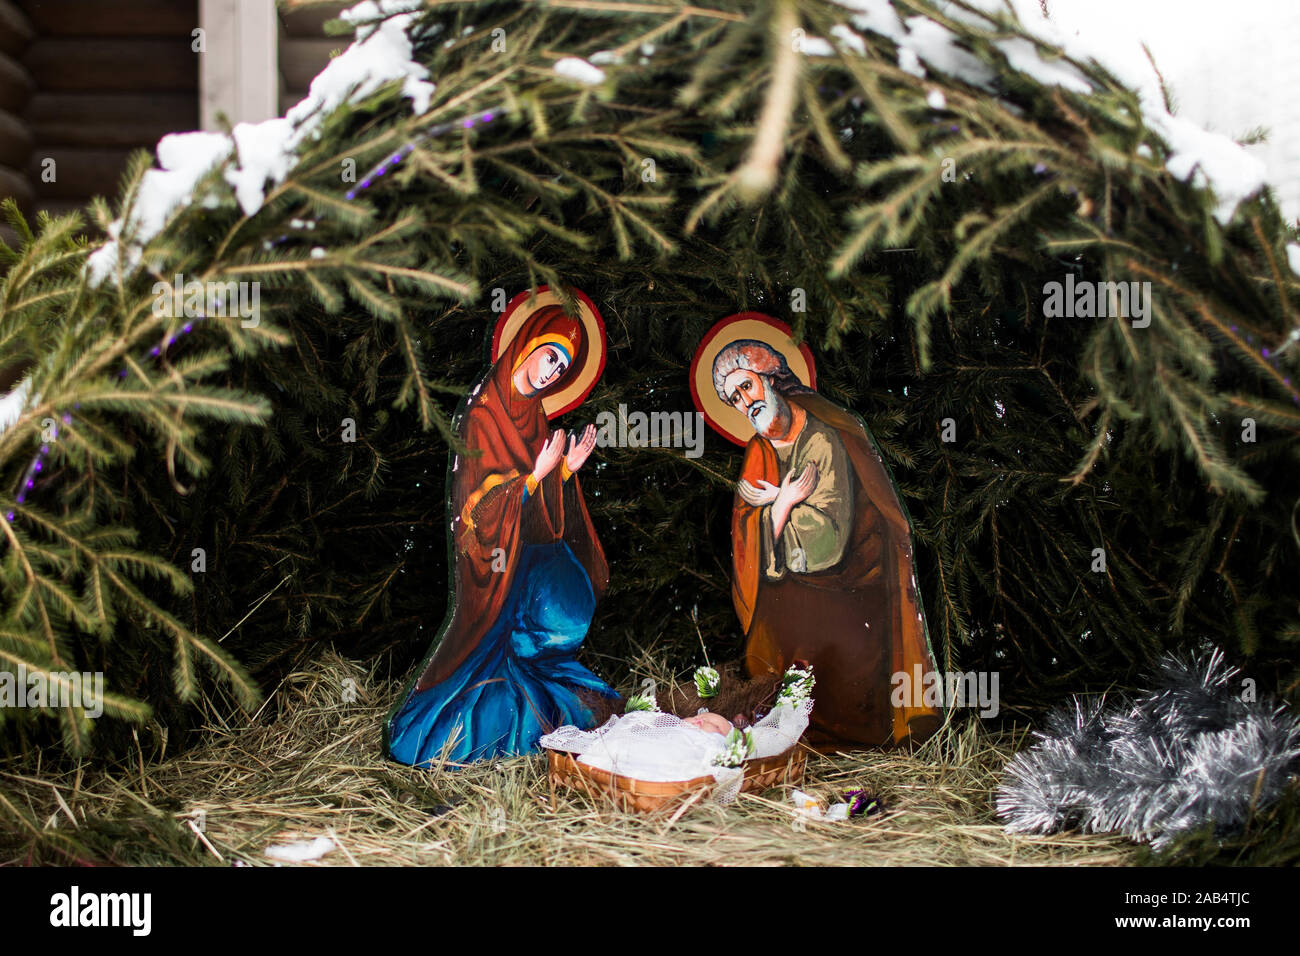 Christmas nativity scene represented with statuettes of Mary, Joseph and baby Jesus. Close up. Stock Photo